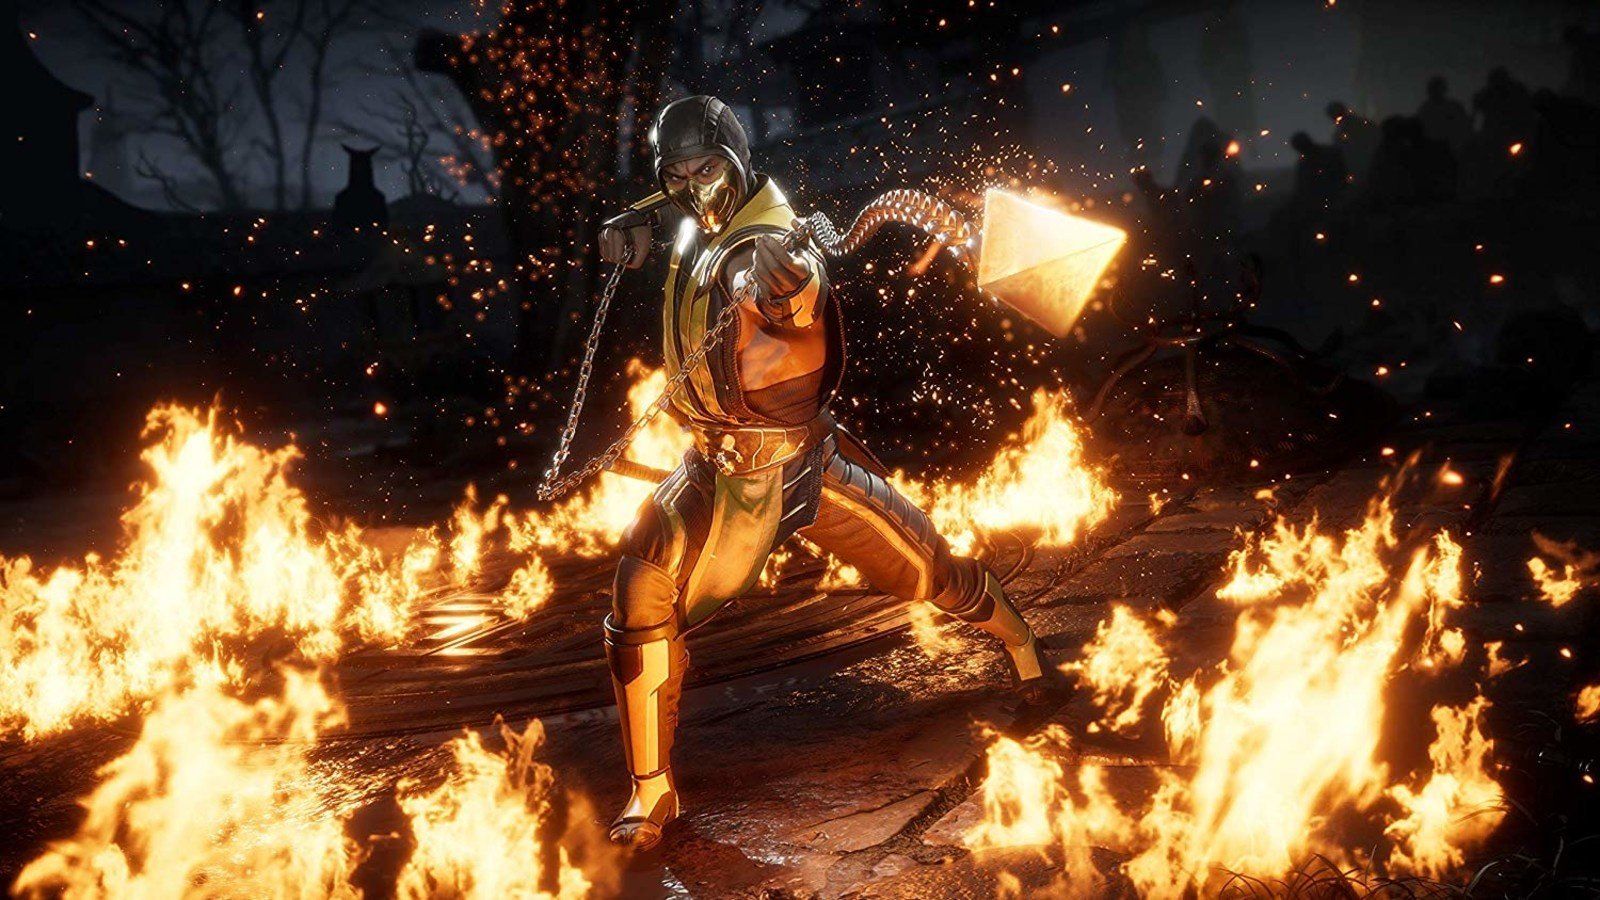 Mortal Kombat 11 Aftermath: How to Perform All Fatalities